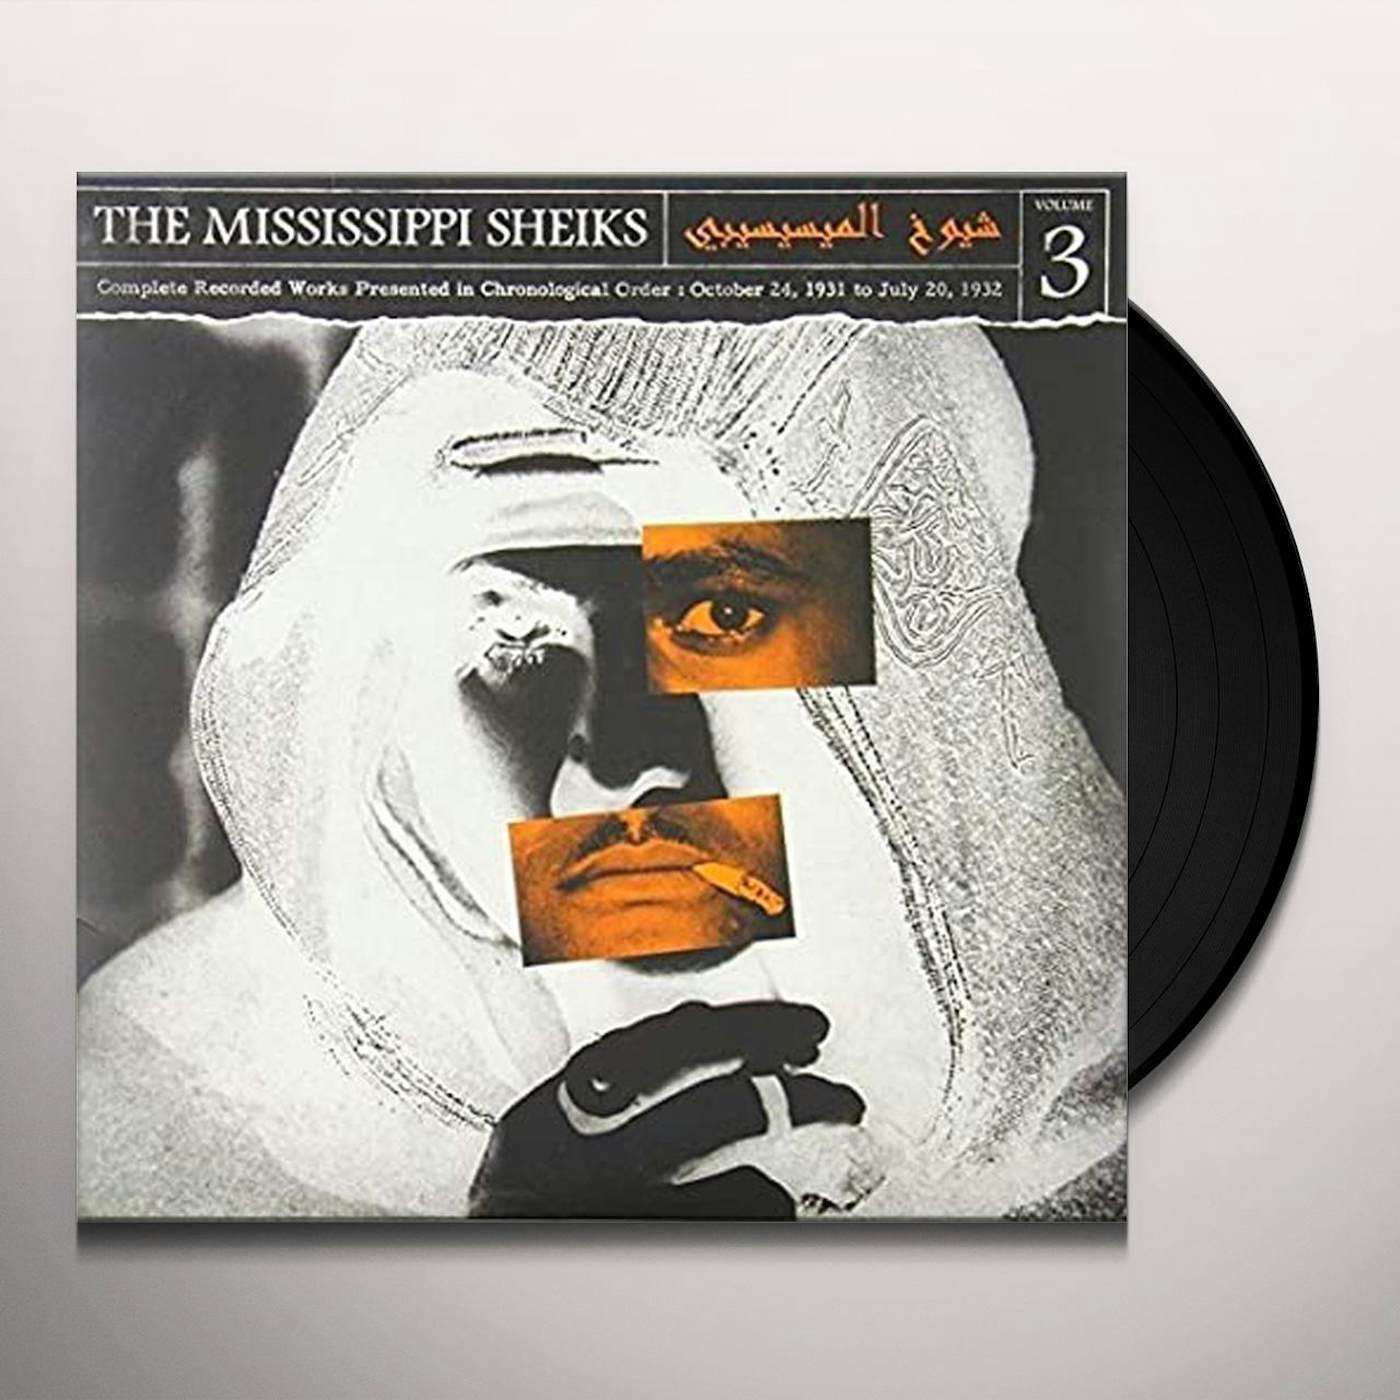 Mississippi Sheiks COMPLETE RECORDED WORKS IN CHRONOLOGICAL ORDER 3 Vinyl Record